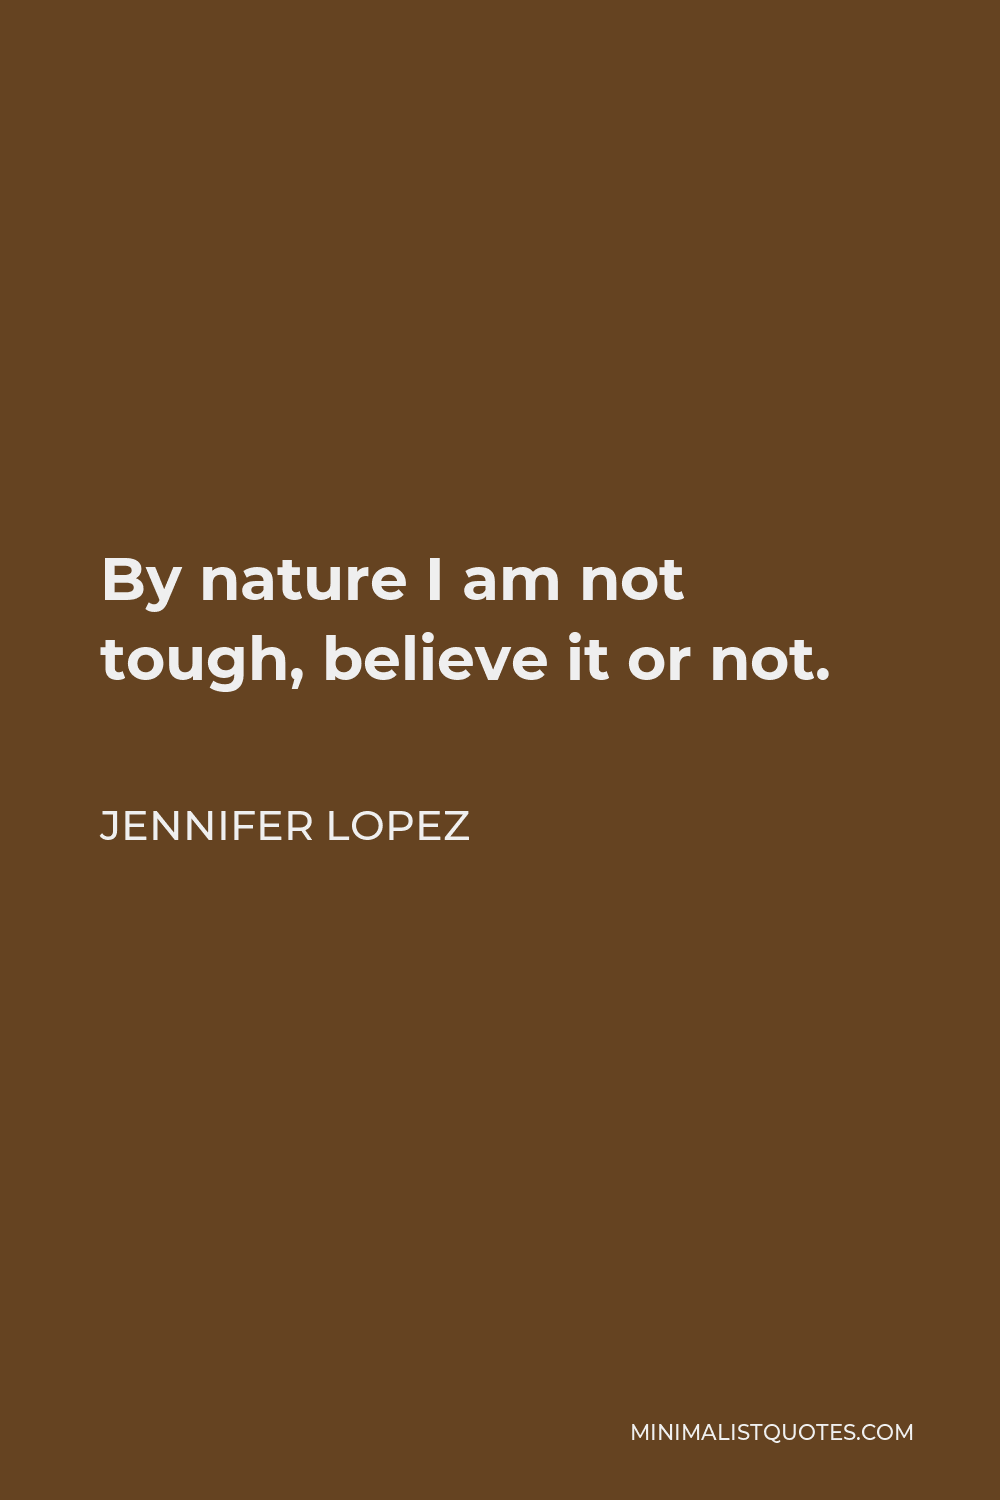 Jennifer Lopez Quote - By nature I am not tough, believe it or not.